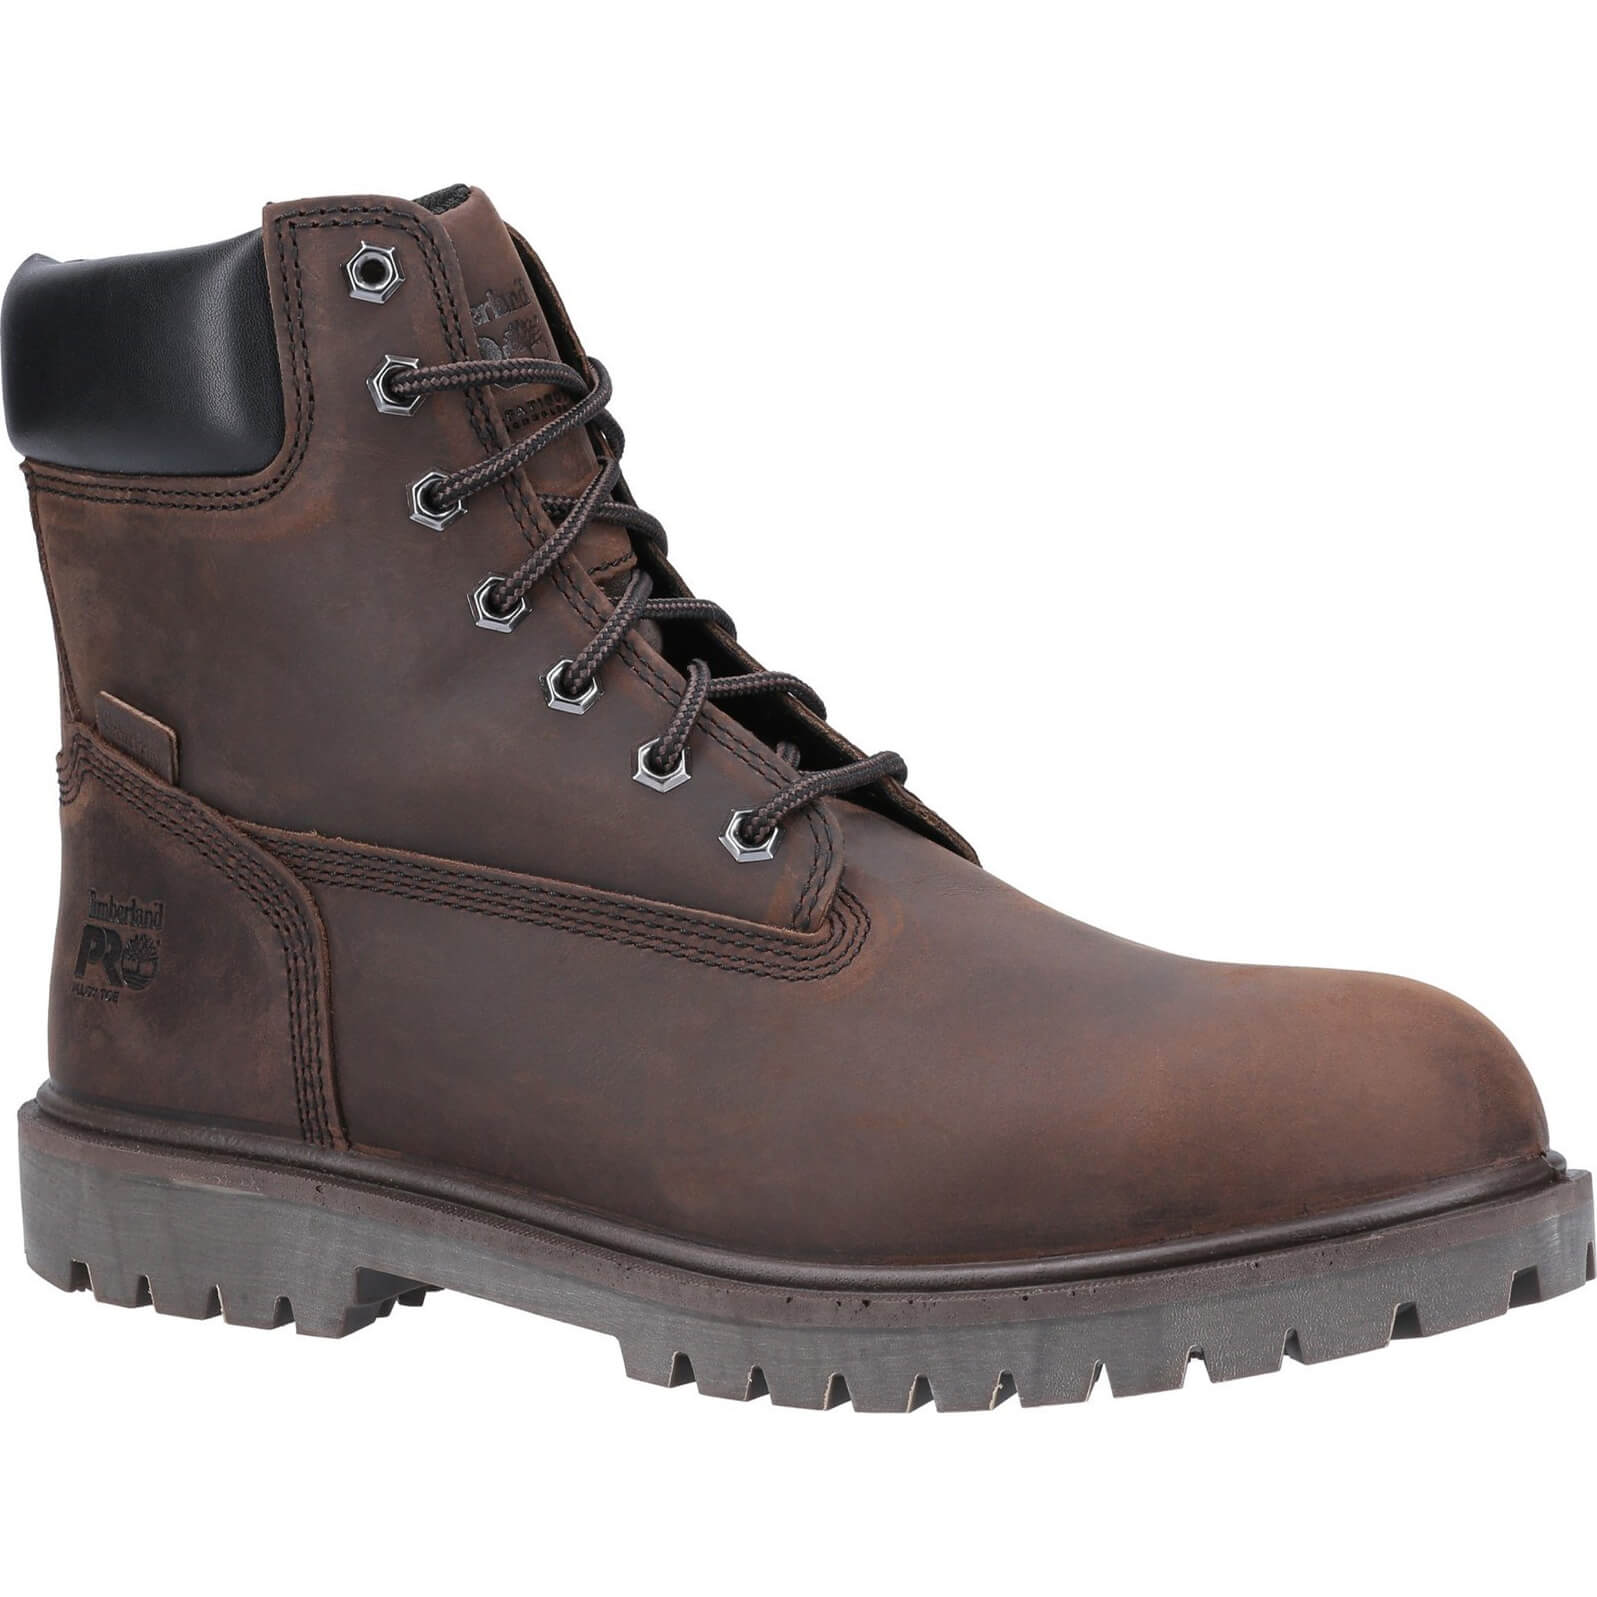 Image of Timberland Pro Iconic Safety Toe Work Boot Brown Size 13